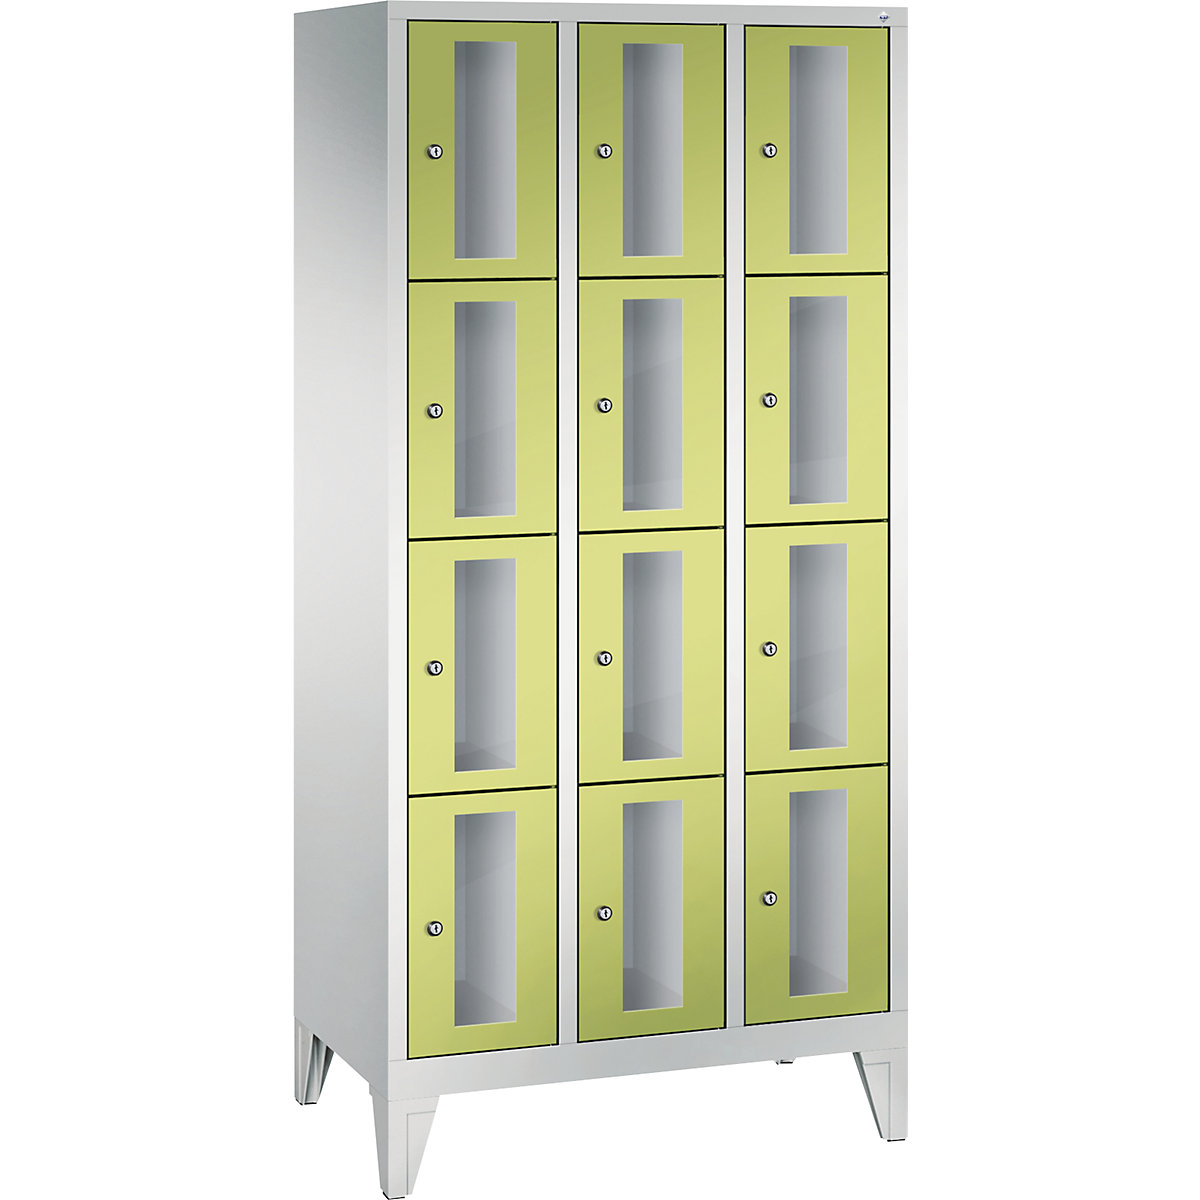 C+P – CLASSIC locker unit, compartment height 375 mm, with feet, 12 compartments, width 900 mm, viridian green door